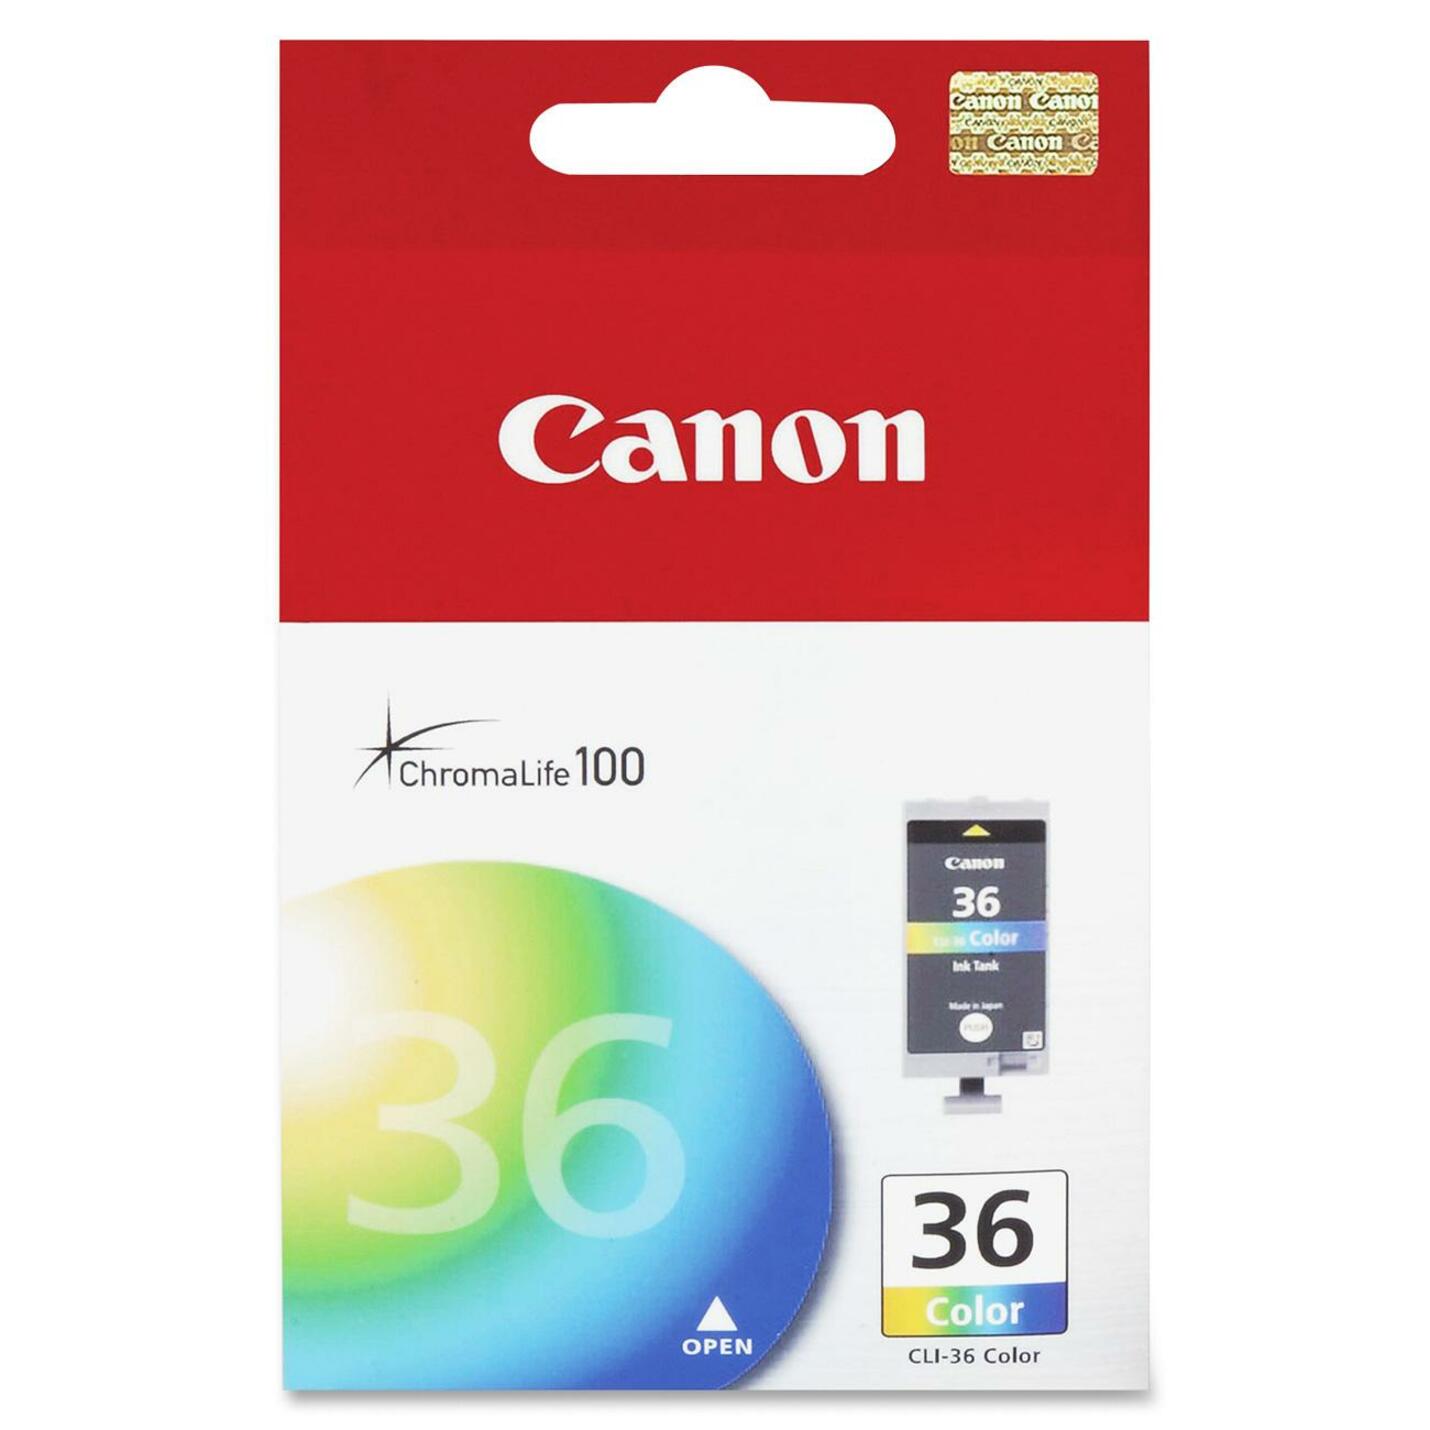 Canon 1511B002 CLI-36 Colored Ink Cartridge, 100 Page Yield, Tri-color